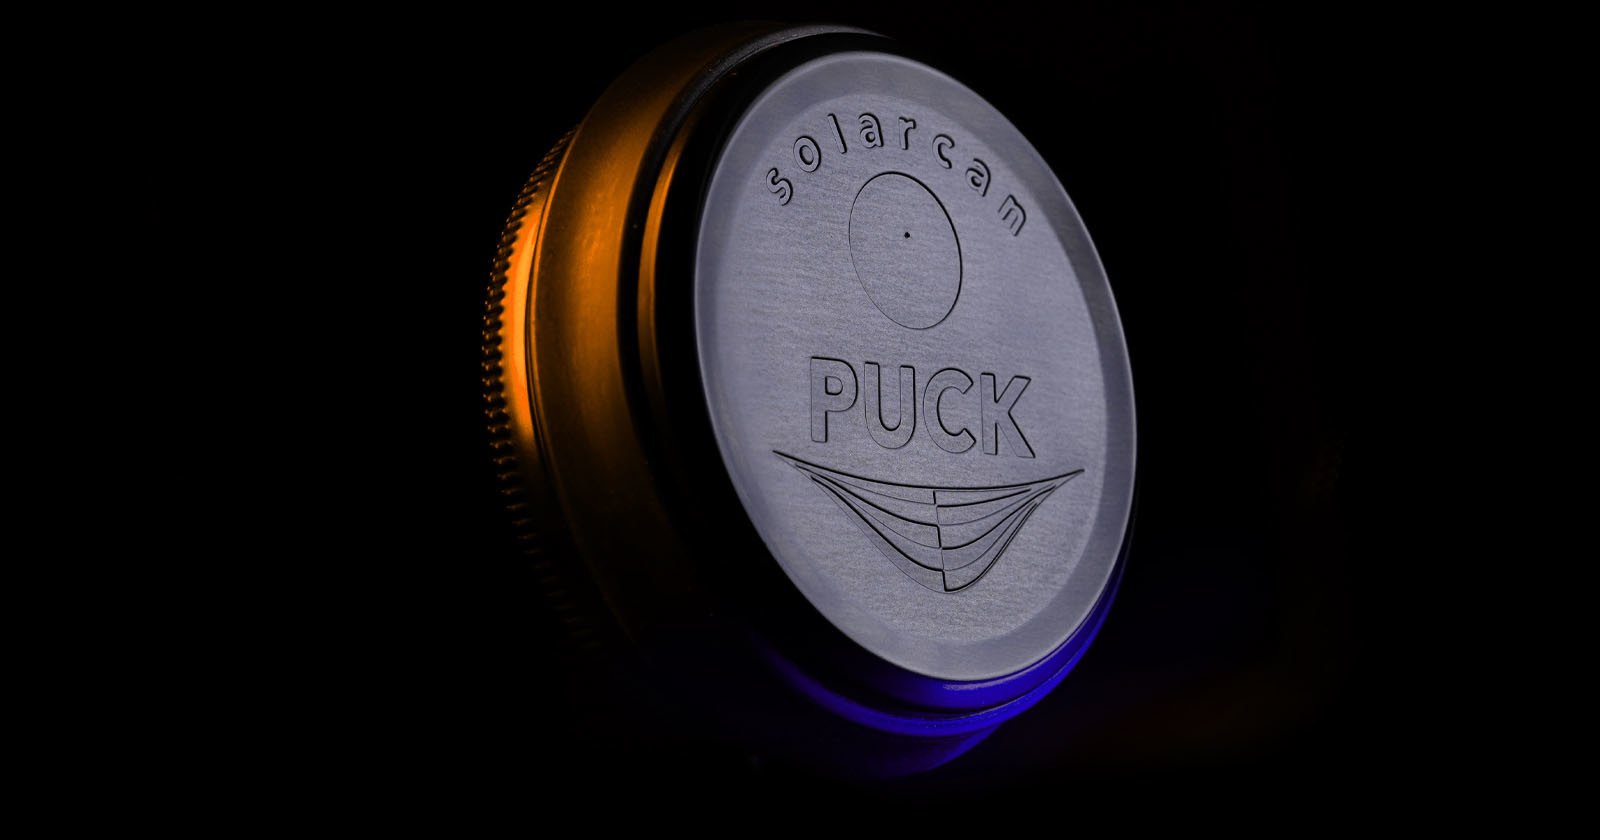  solarcan puck single-day time exposure pinhole camera 